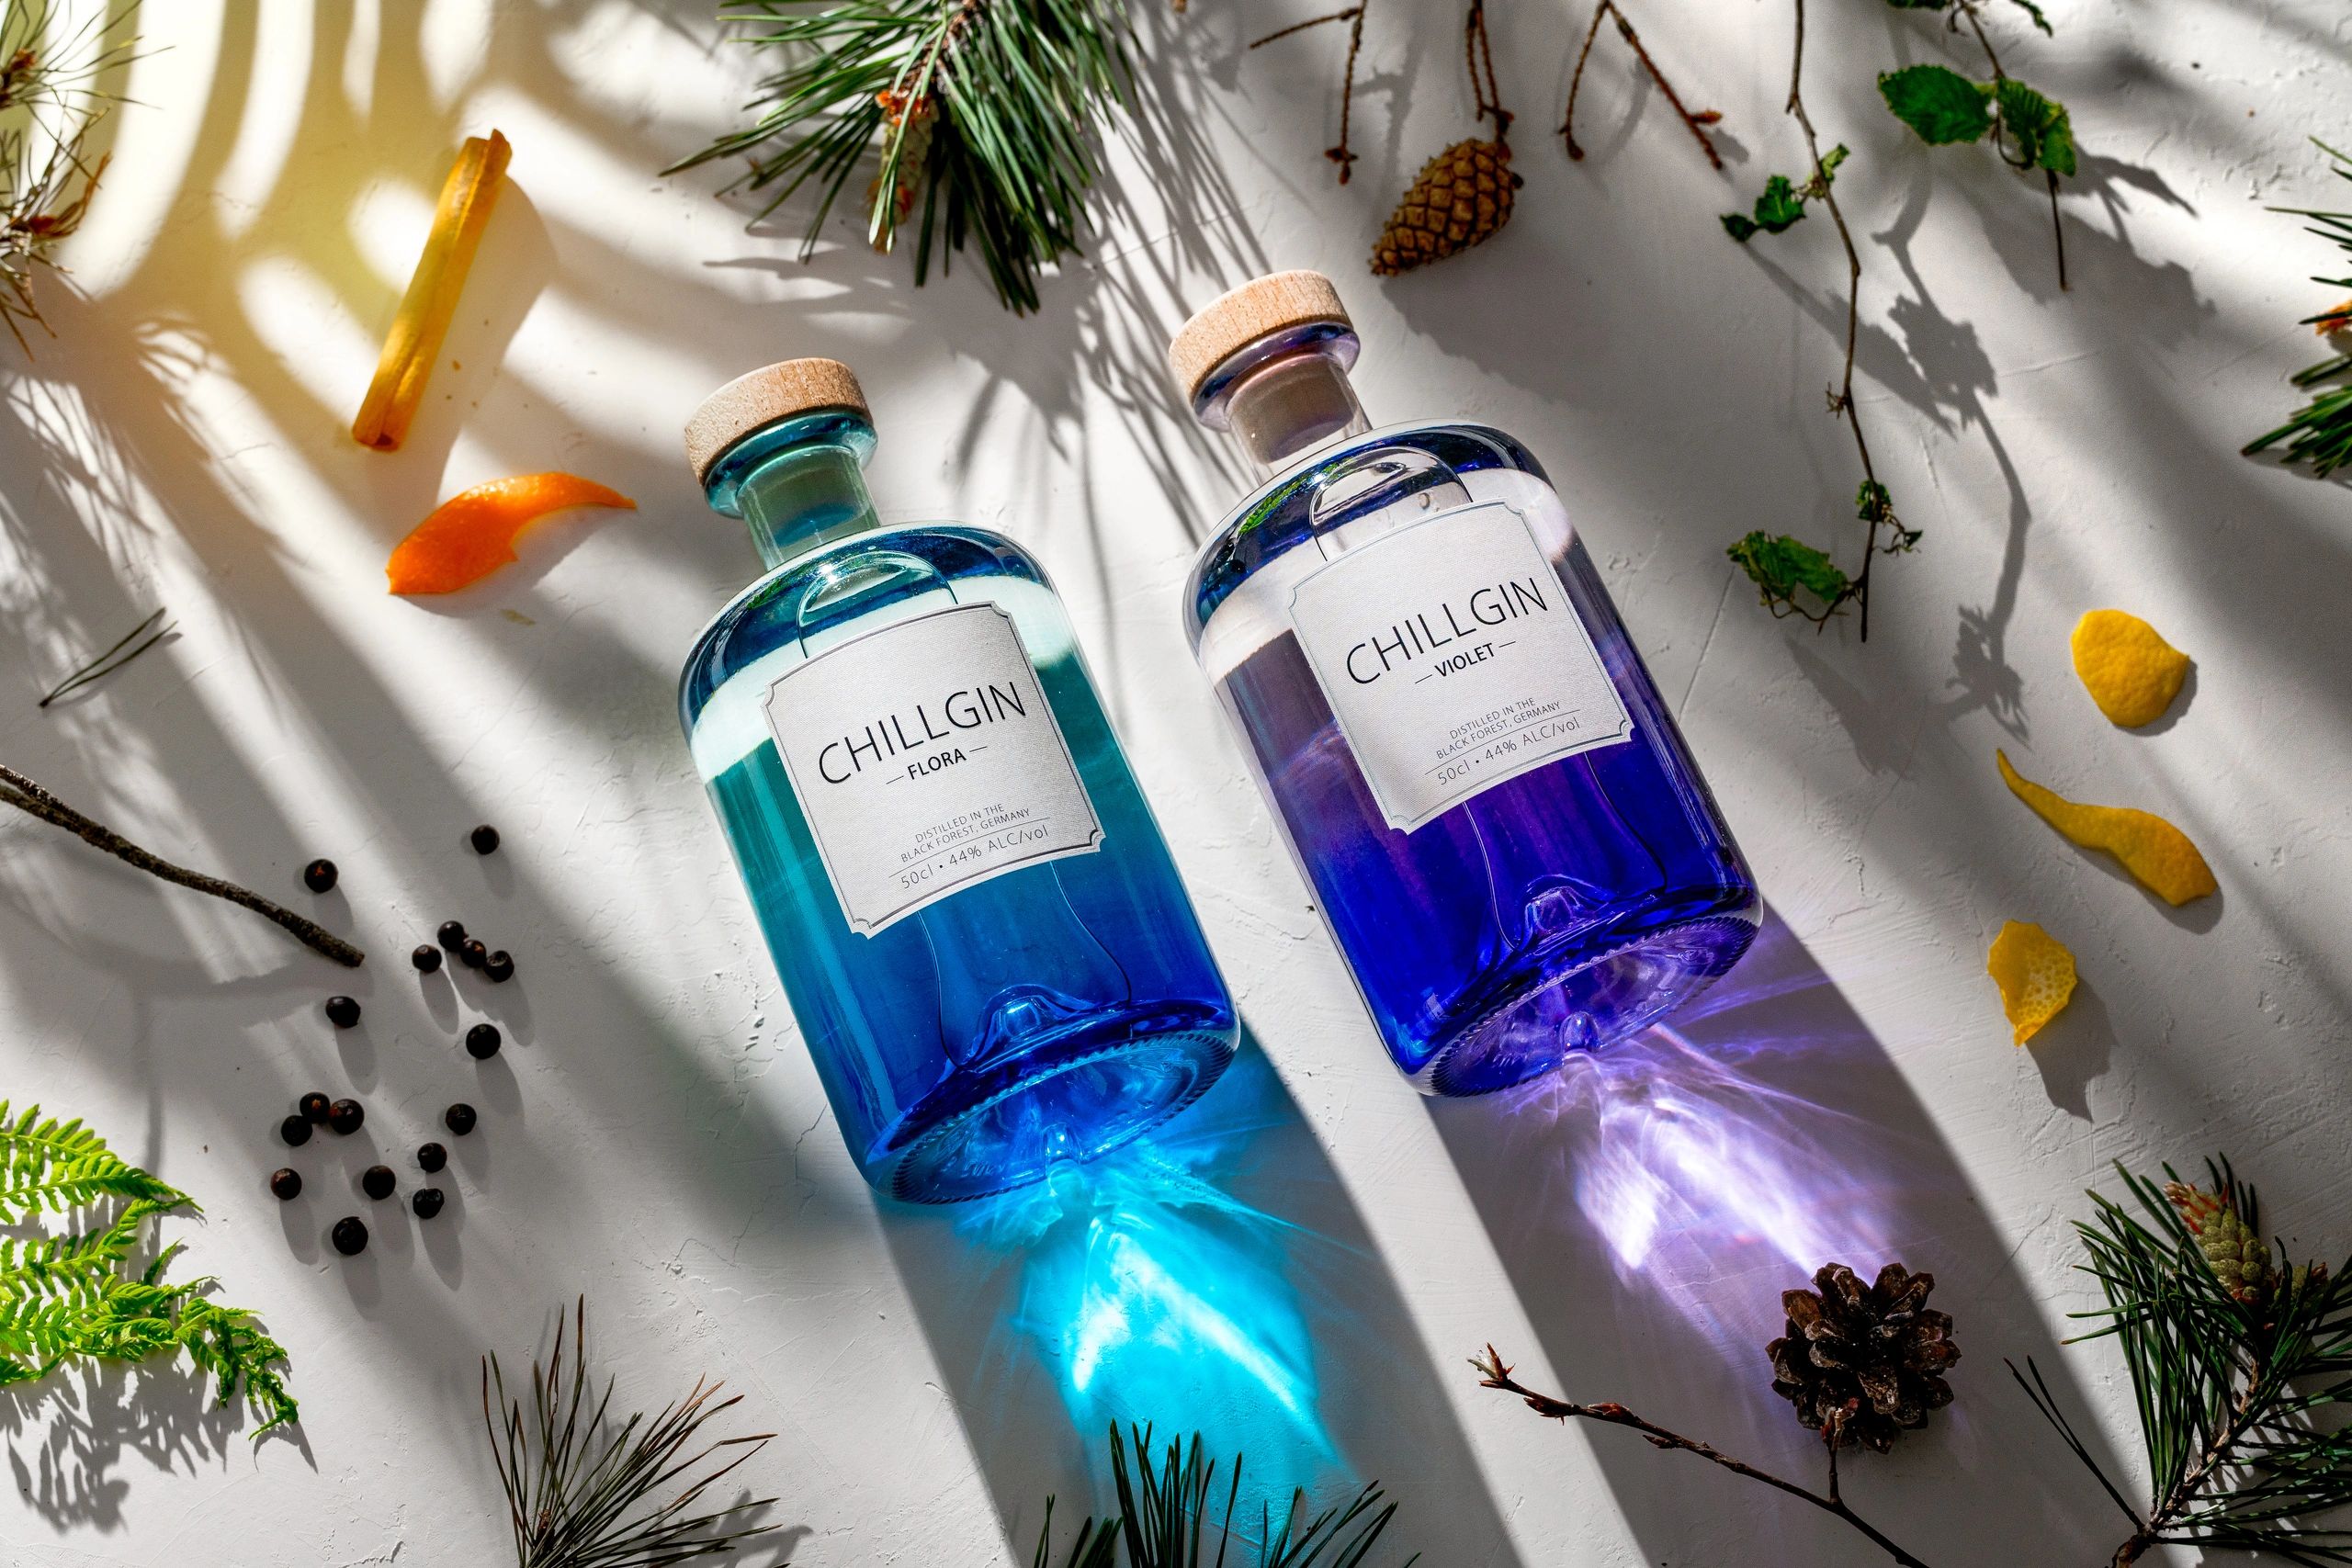 CHILL Gin: Unwind with the Art of Chilling